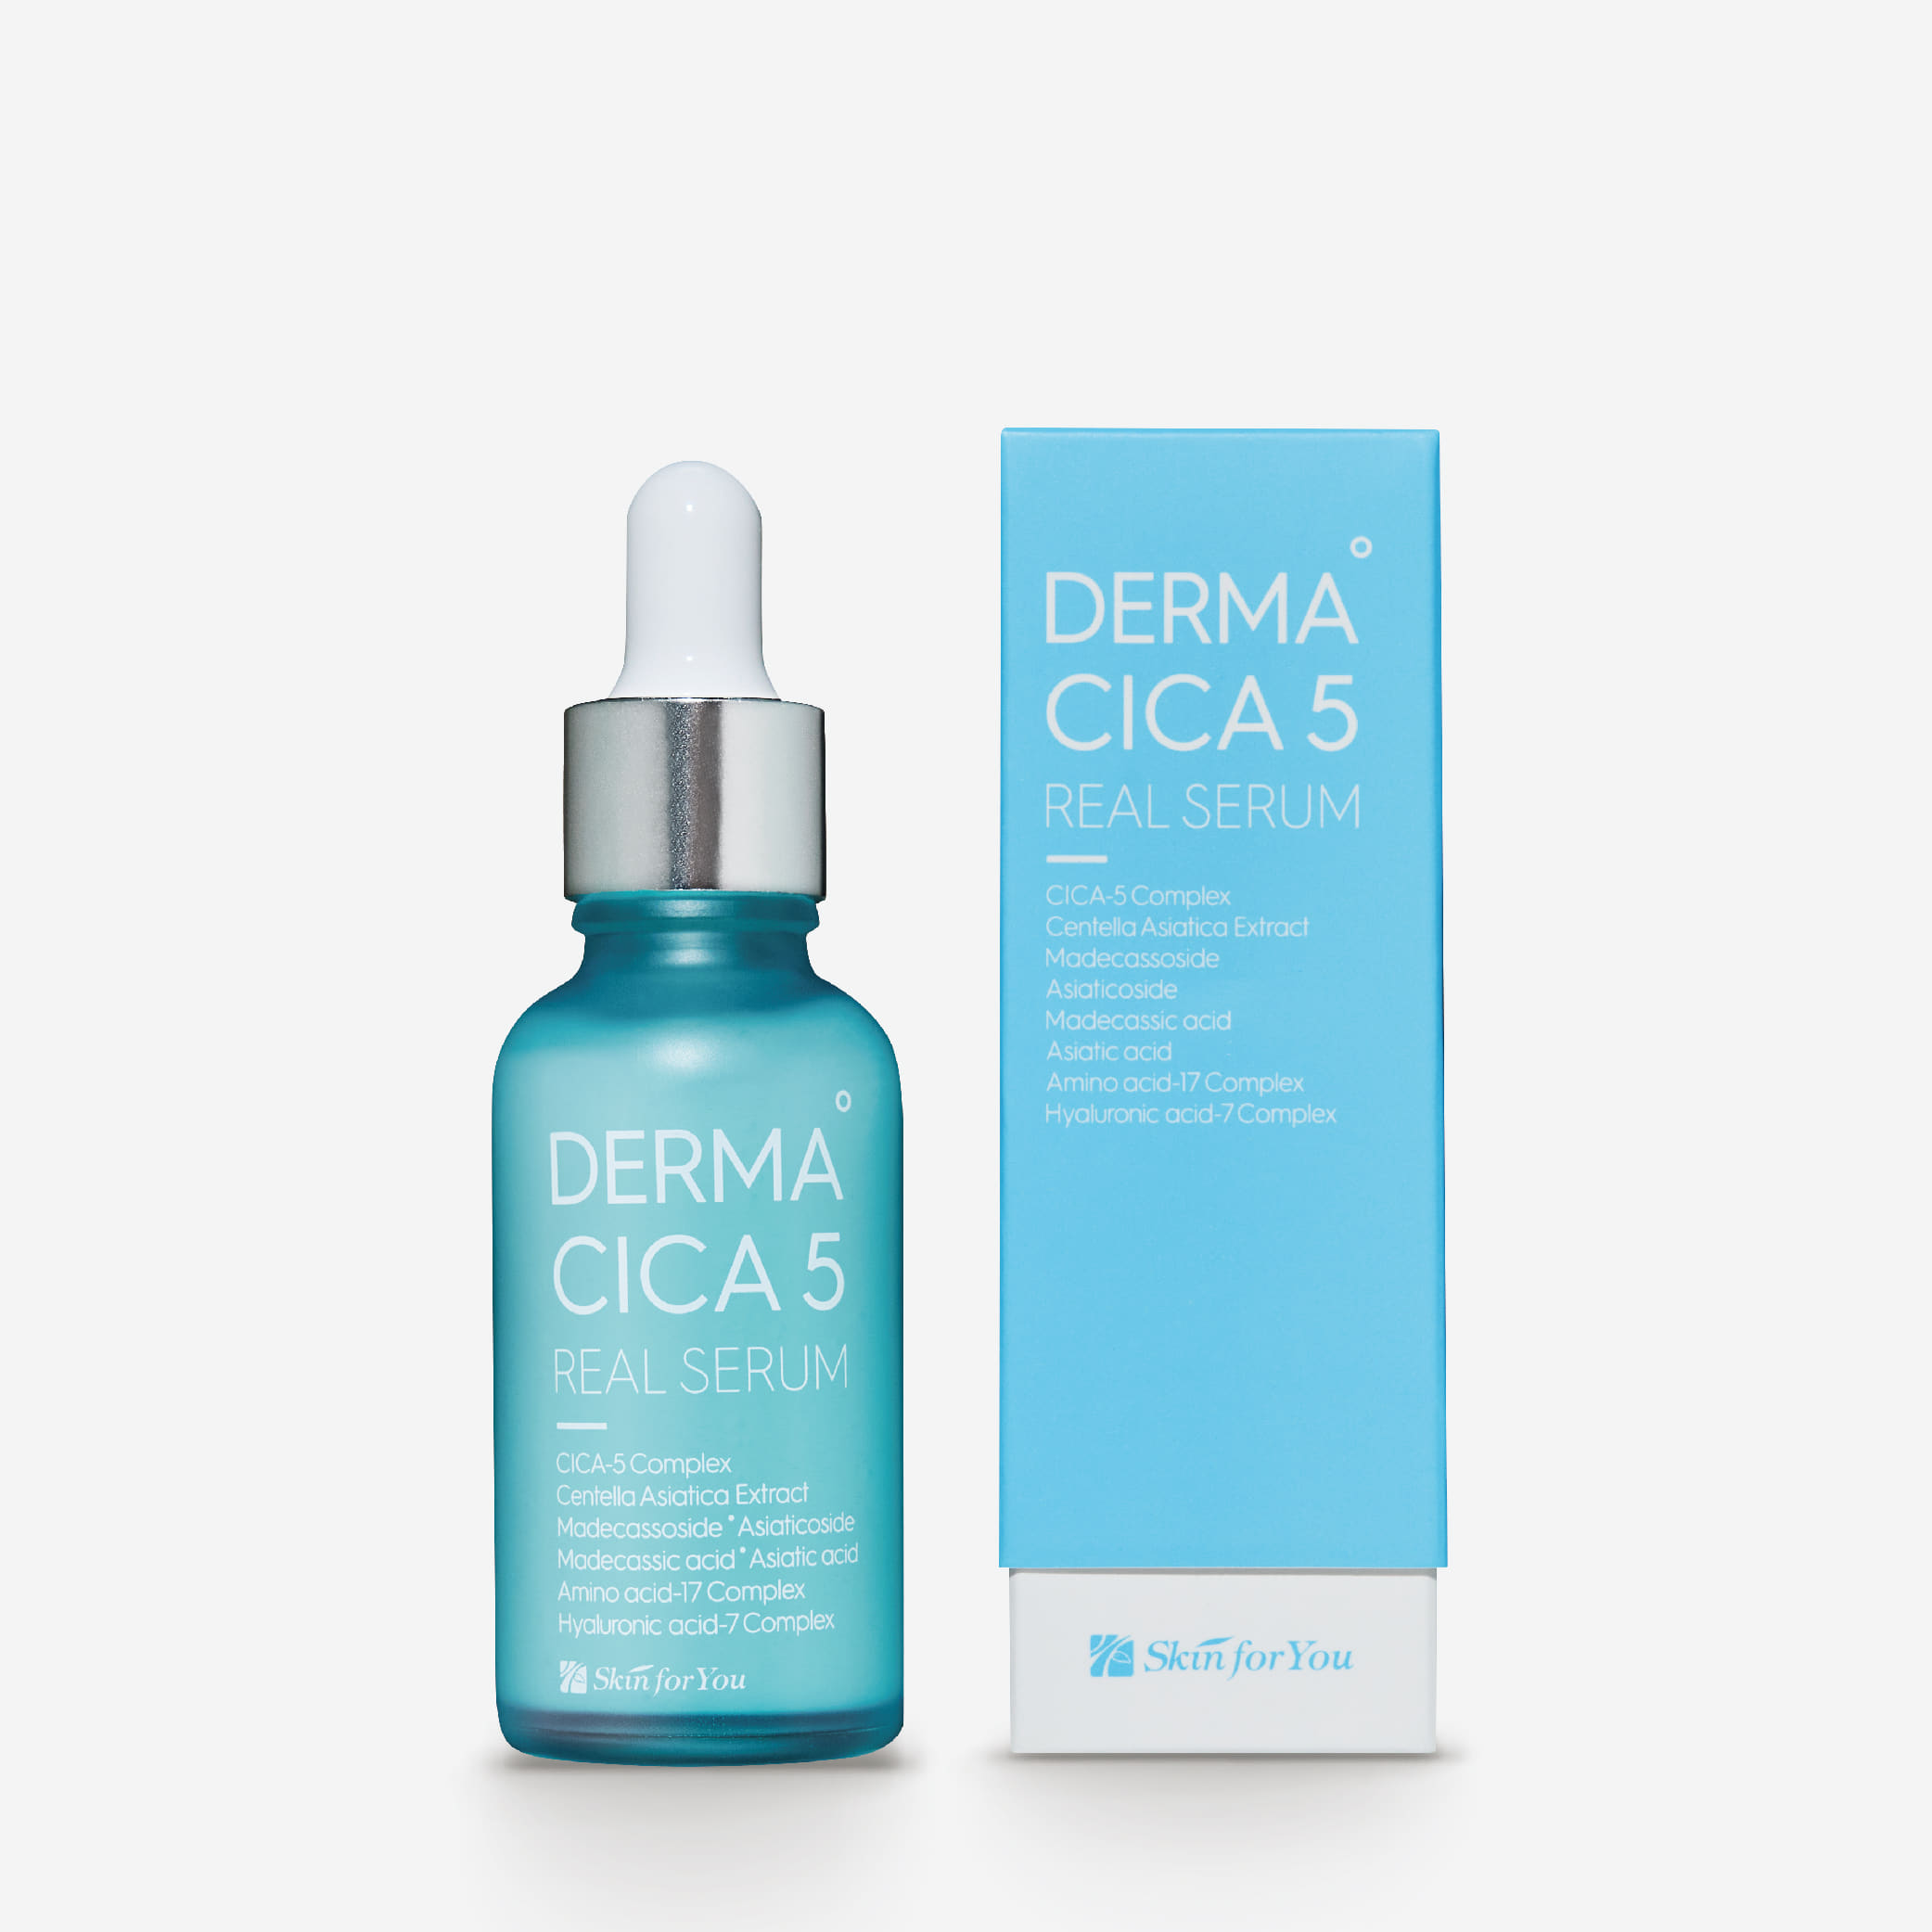 Skin for You Derma Cica5 Real Serum